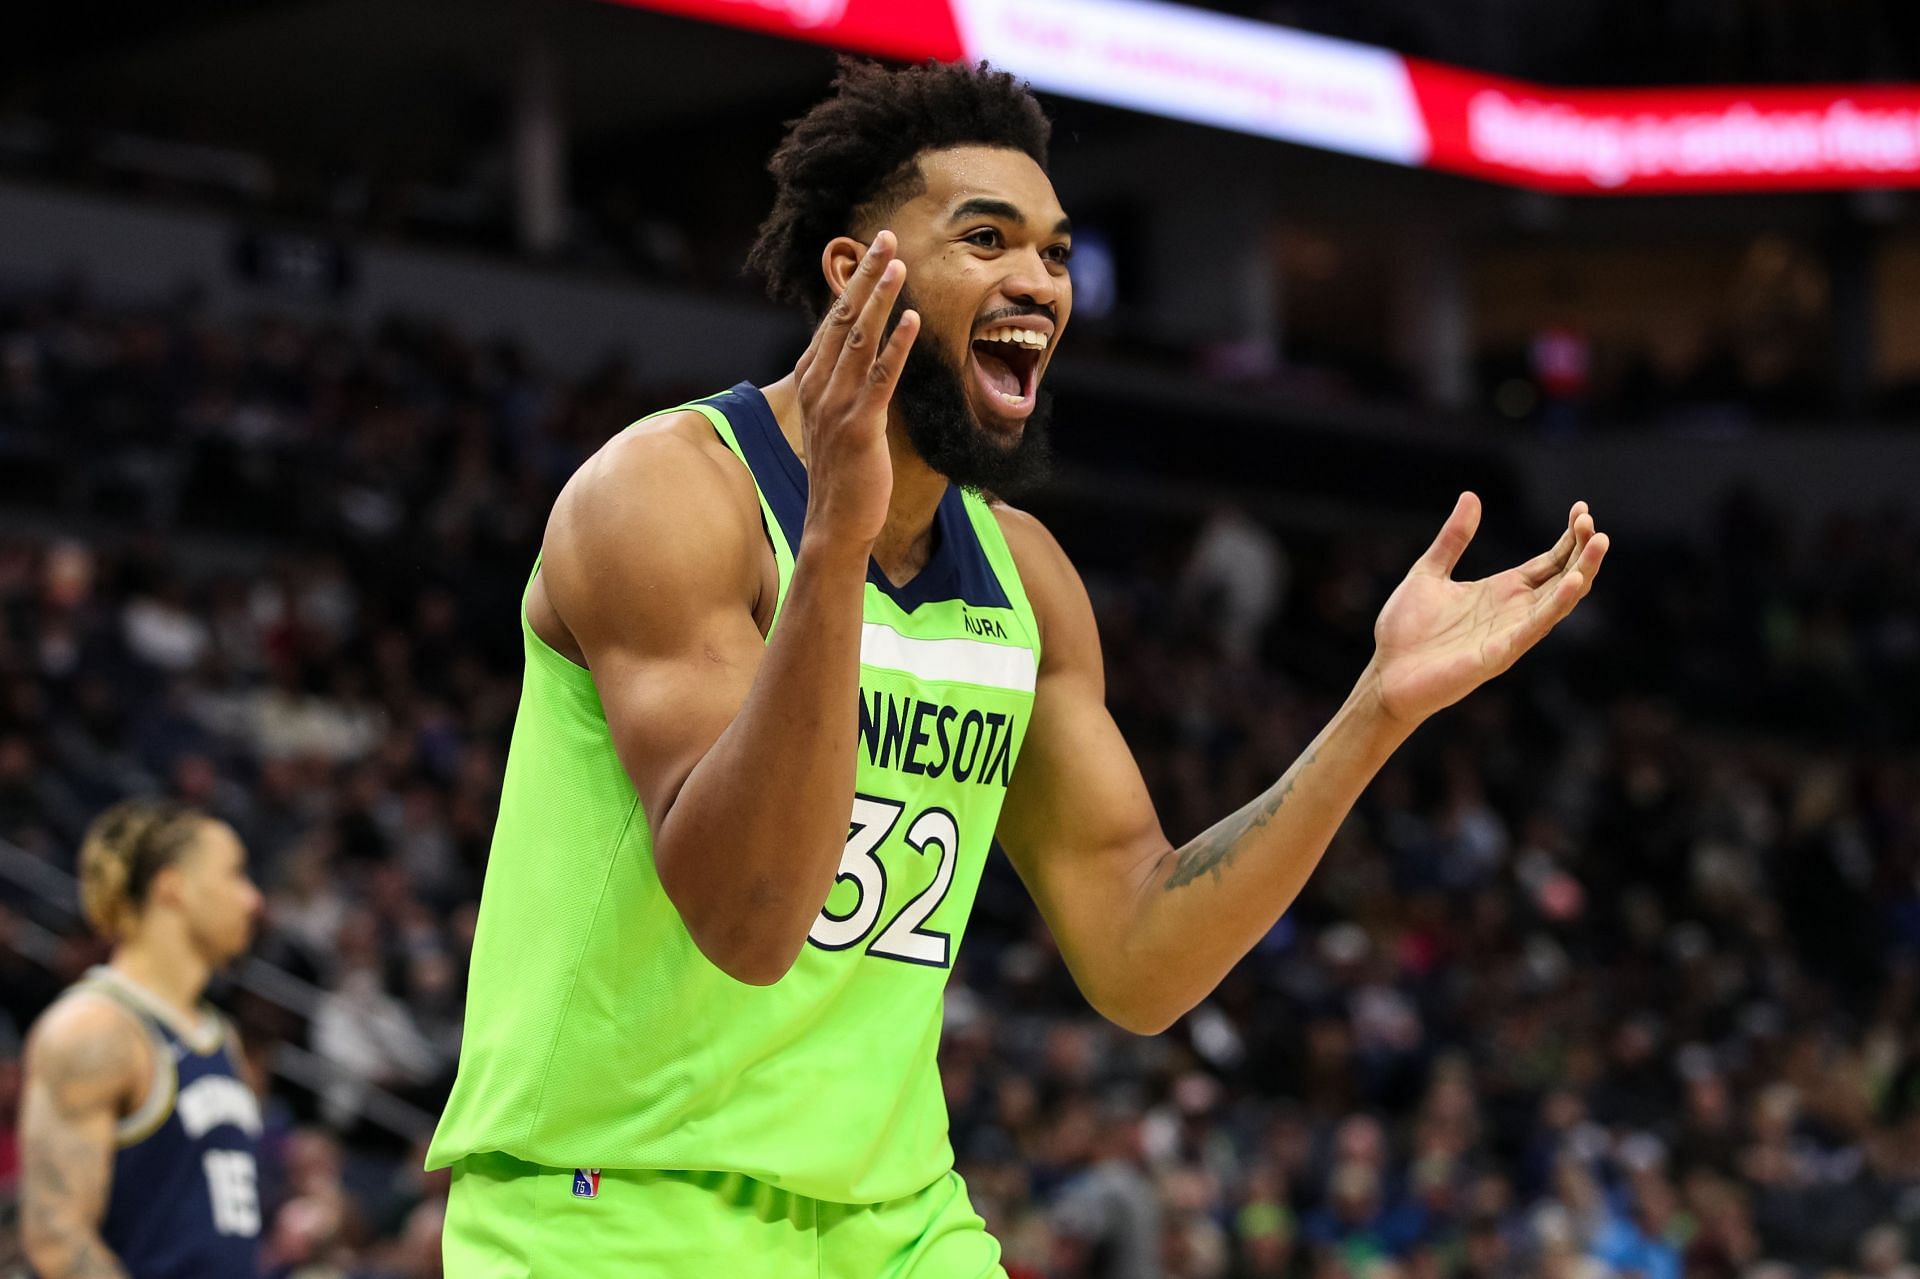 Karl-Anthony Towns in a two-time NBA All-Star